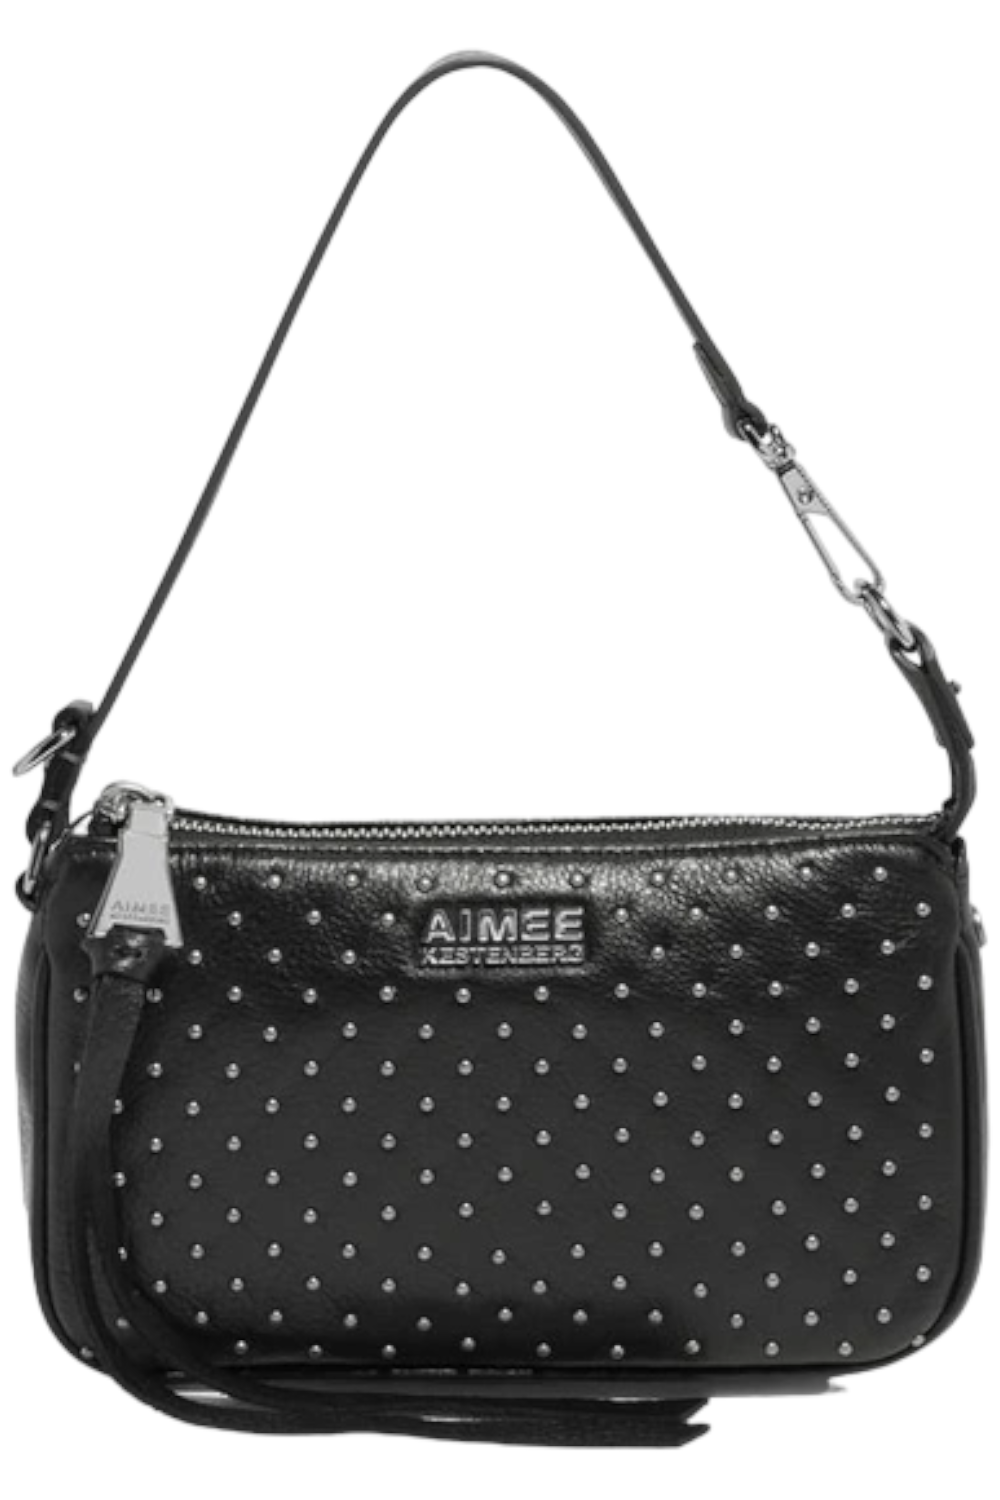 Aimee Kestenberg Handheld Leather Pouch - All My Heart 